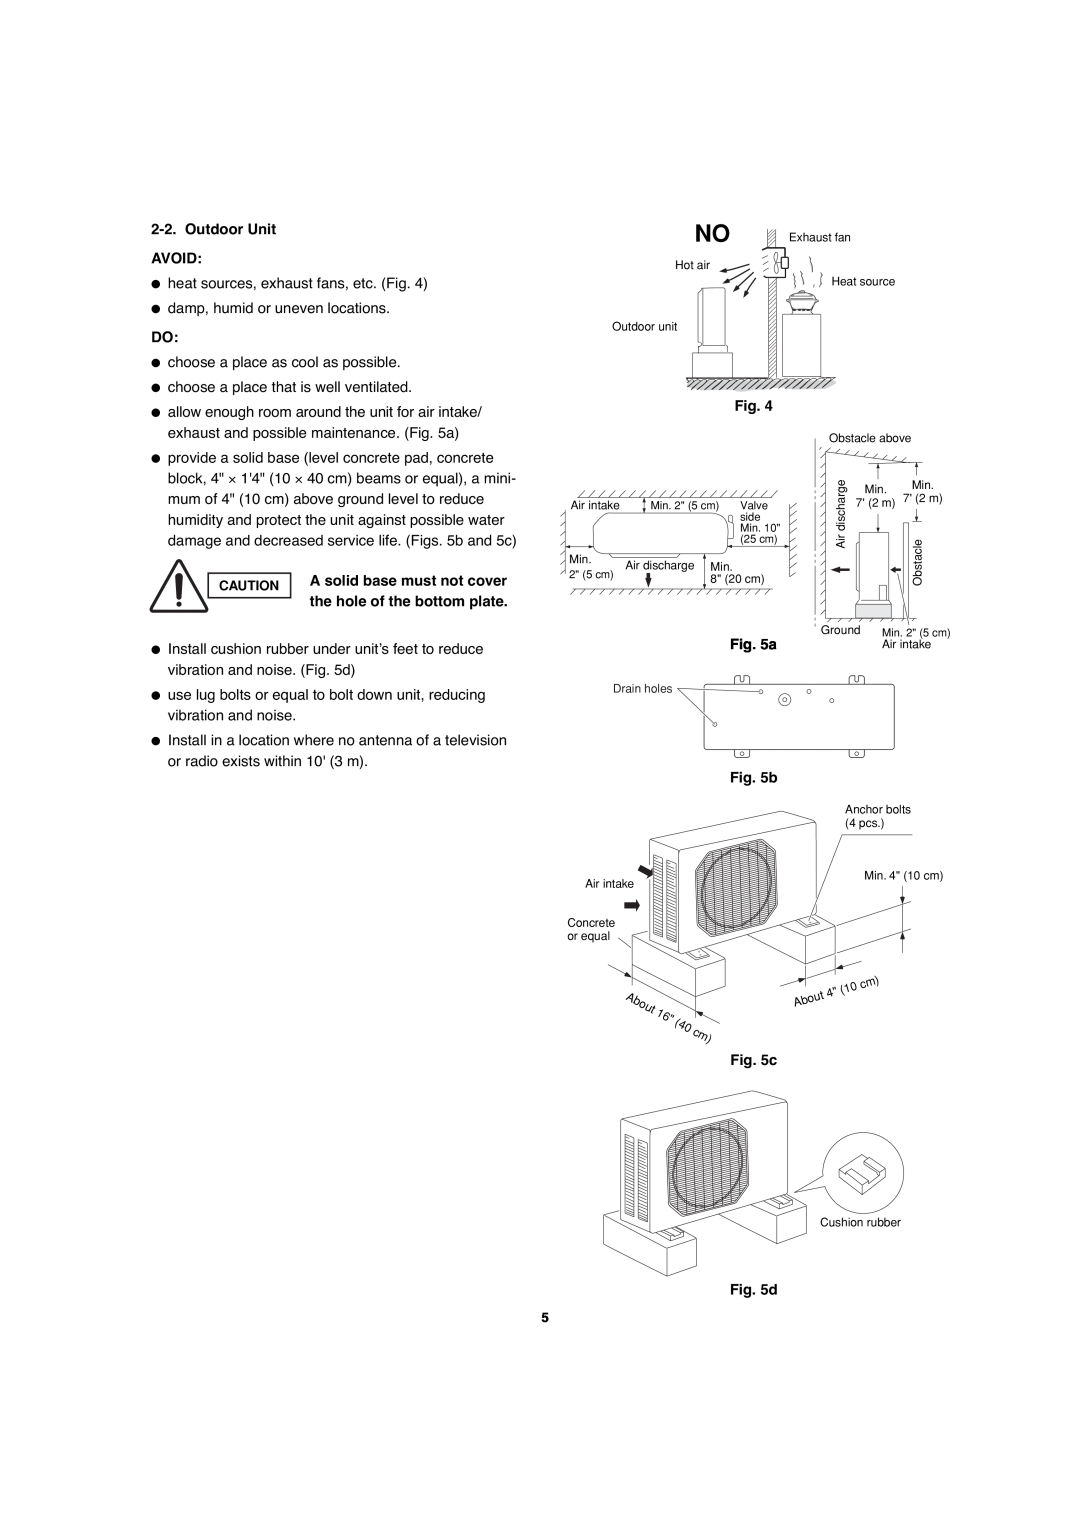 Sanyo CH1271, CH0971 service manual Outdoor Unit AVOID, A solid base must not cover 